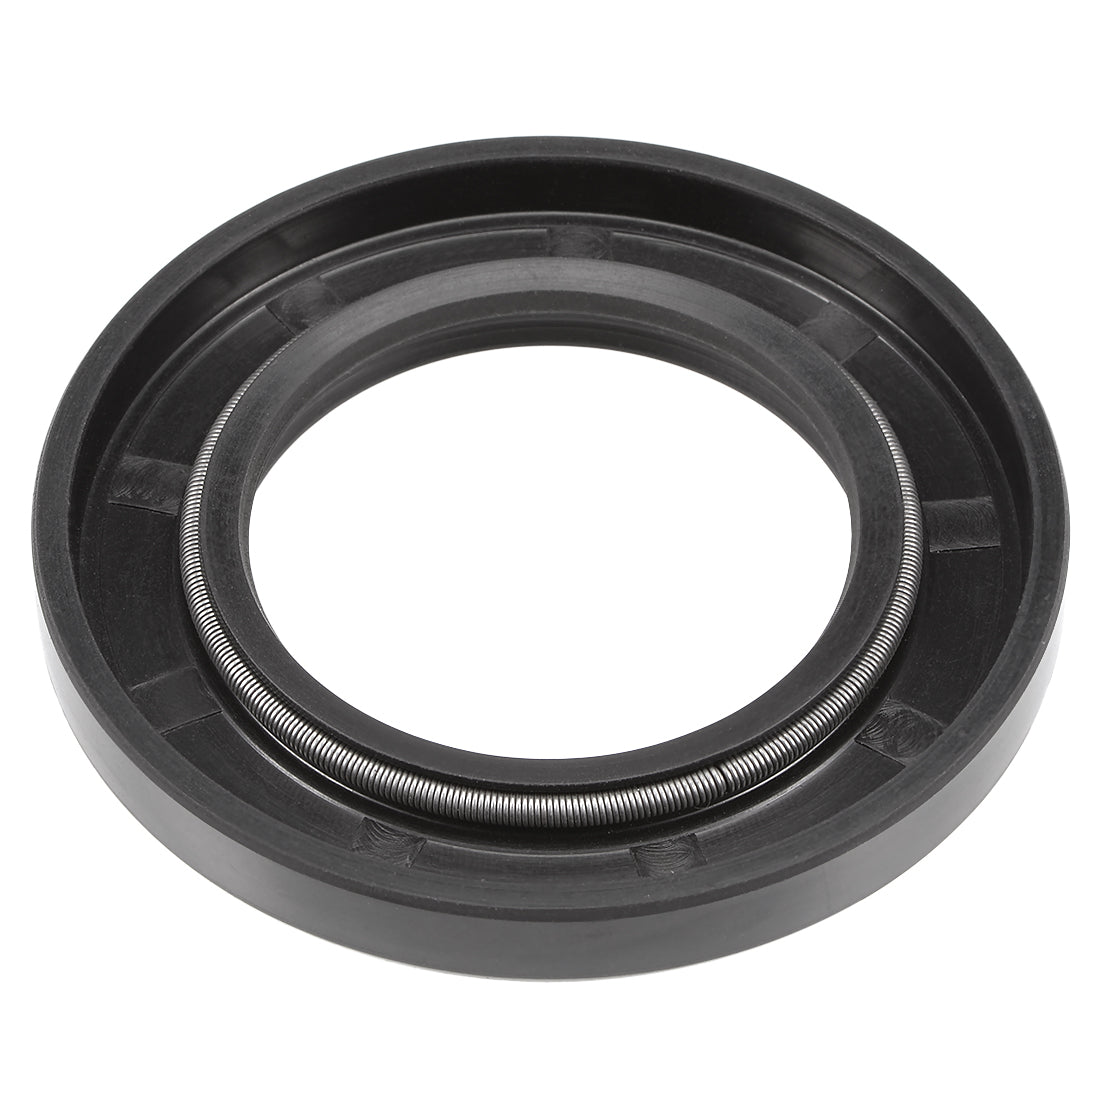 uxcell Uxcell Nitrile Rubber Oil Seals TC Inner Diameter, Nitrile Rubber Cover Double Lip